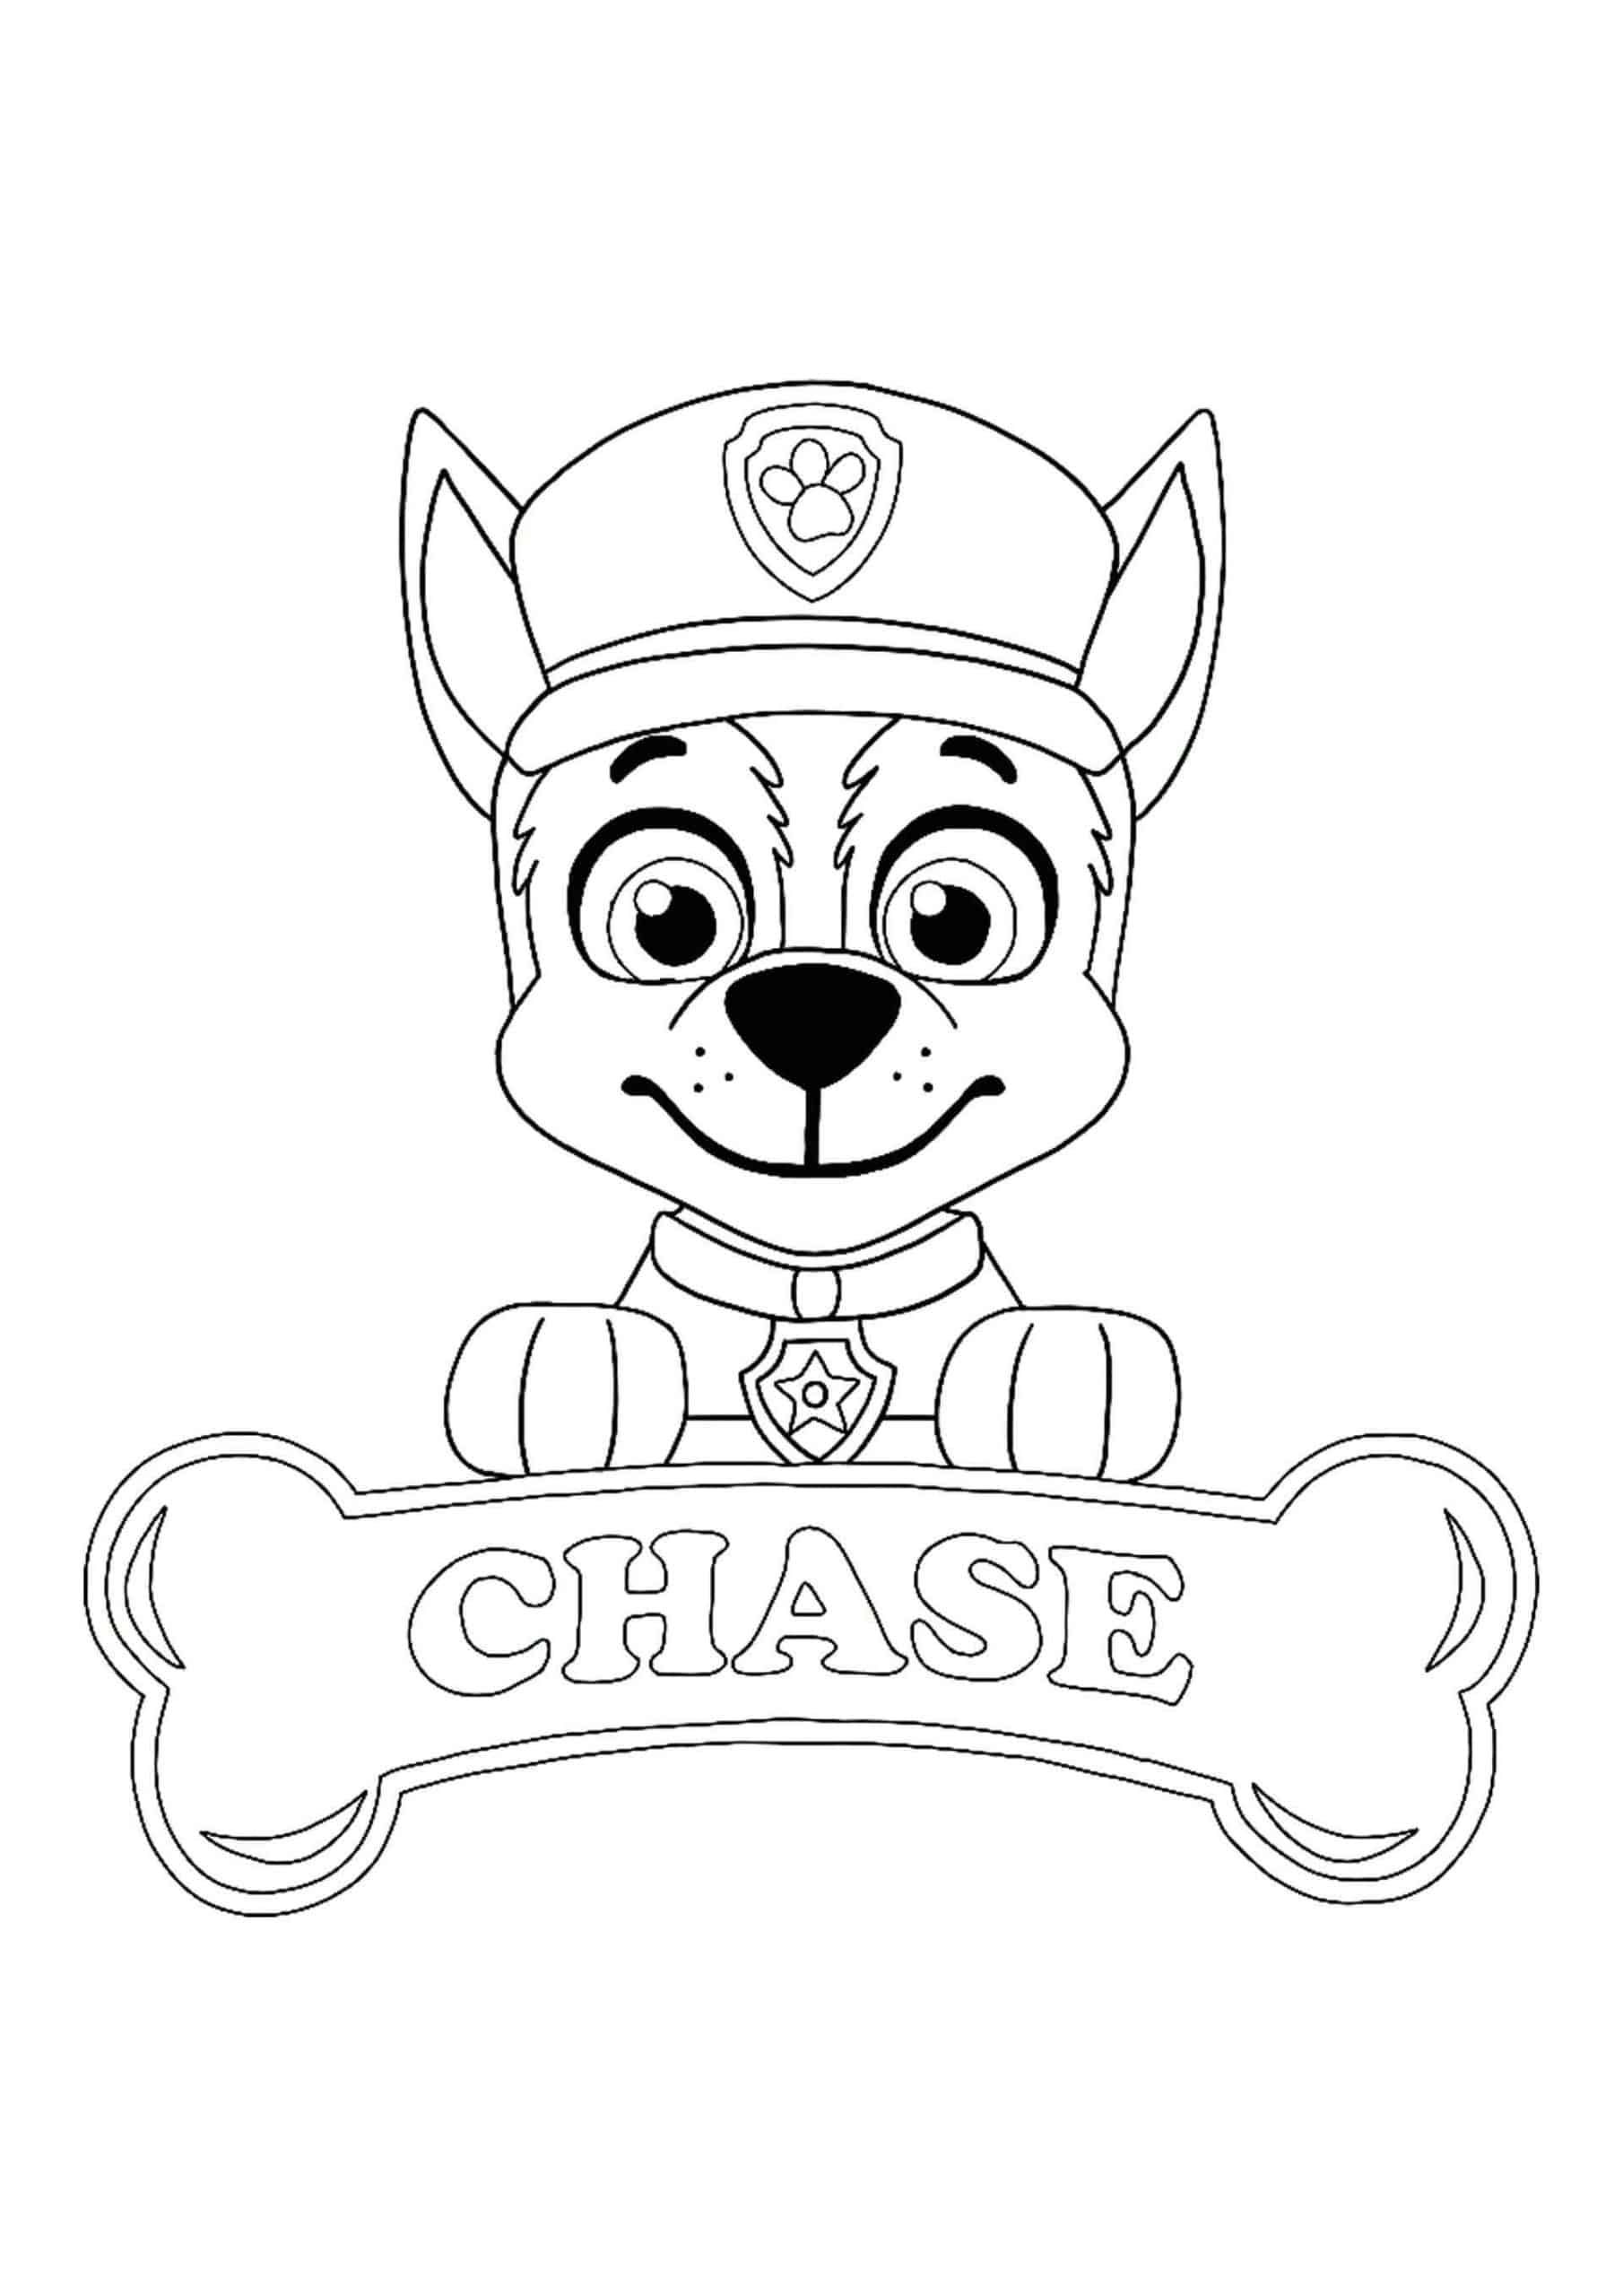 Printable Chase Paw Patrol Coloring Pages - Chase Paw Patrol Coloring Pages